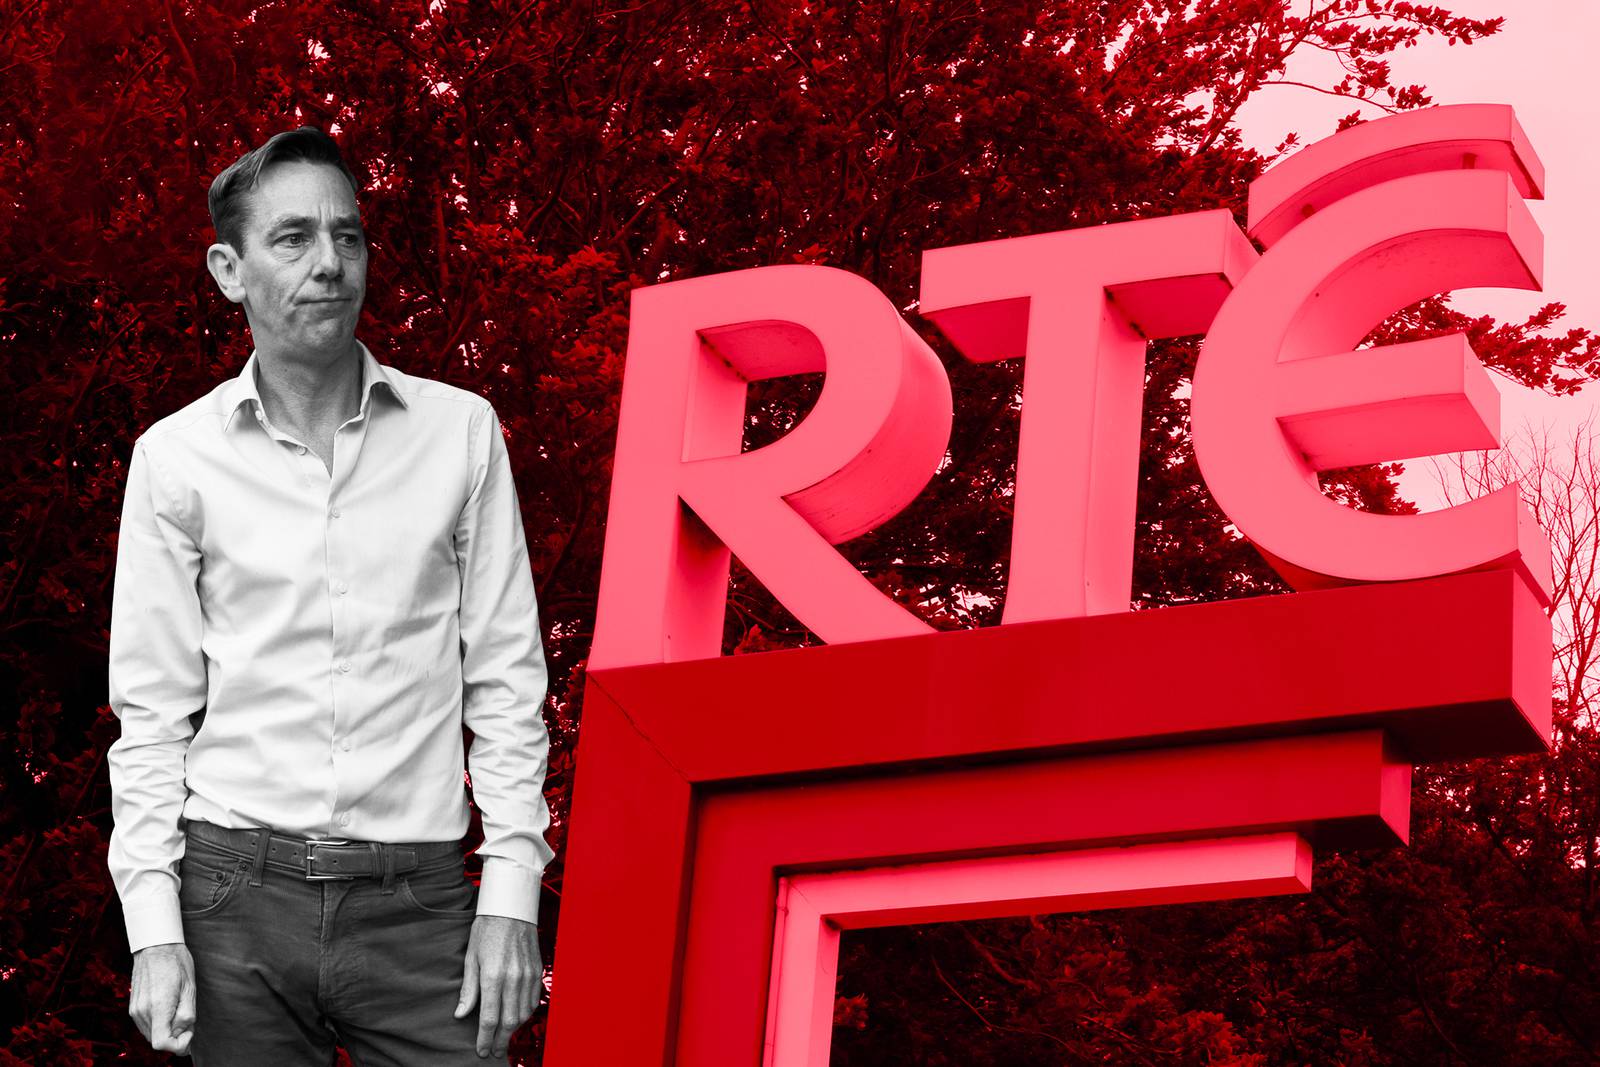 Ryan Tubridy rejects RTÉ's claim he is out of contract as pay controversy deepens